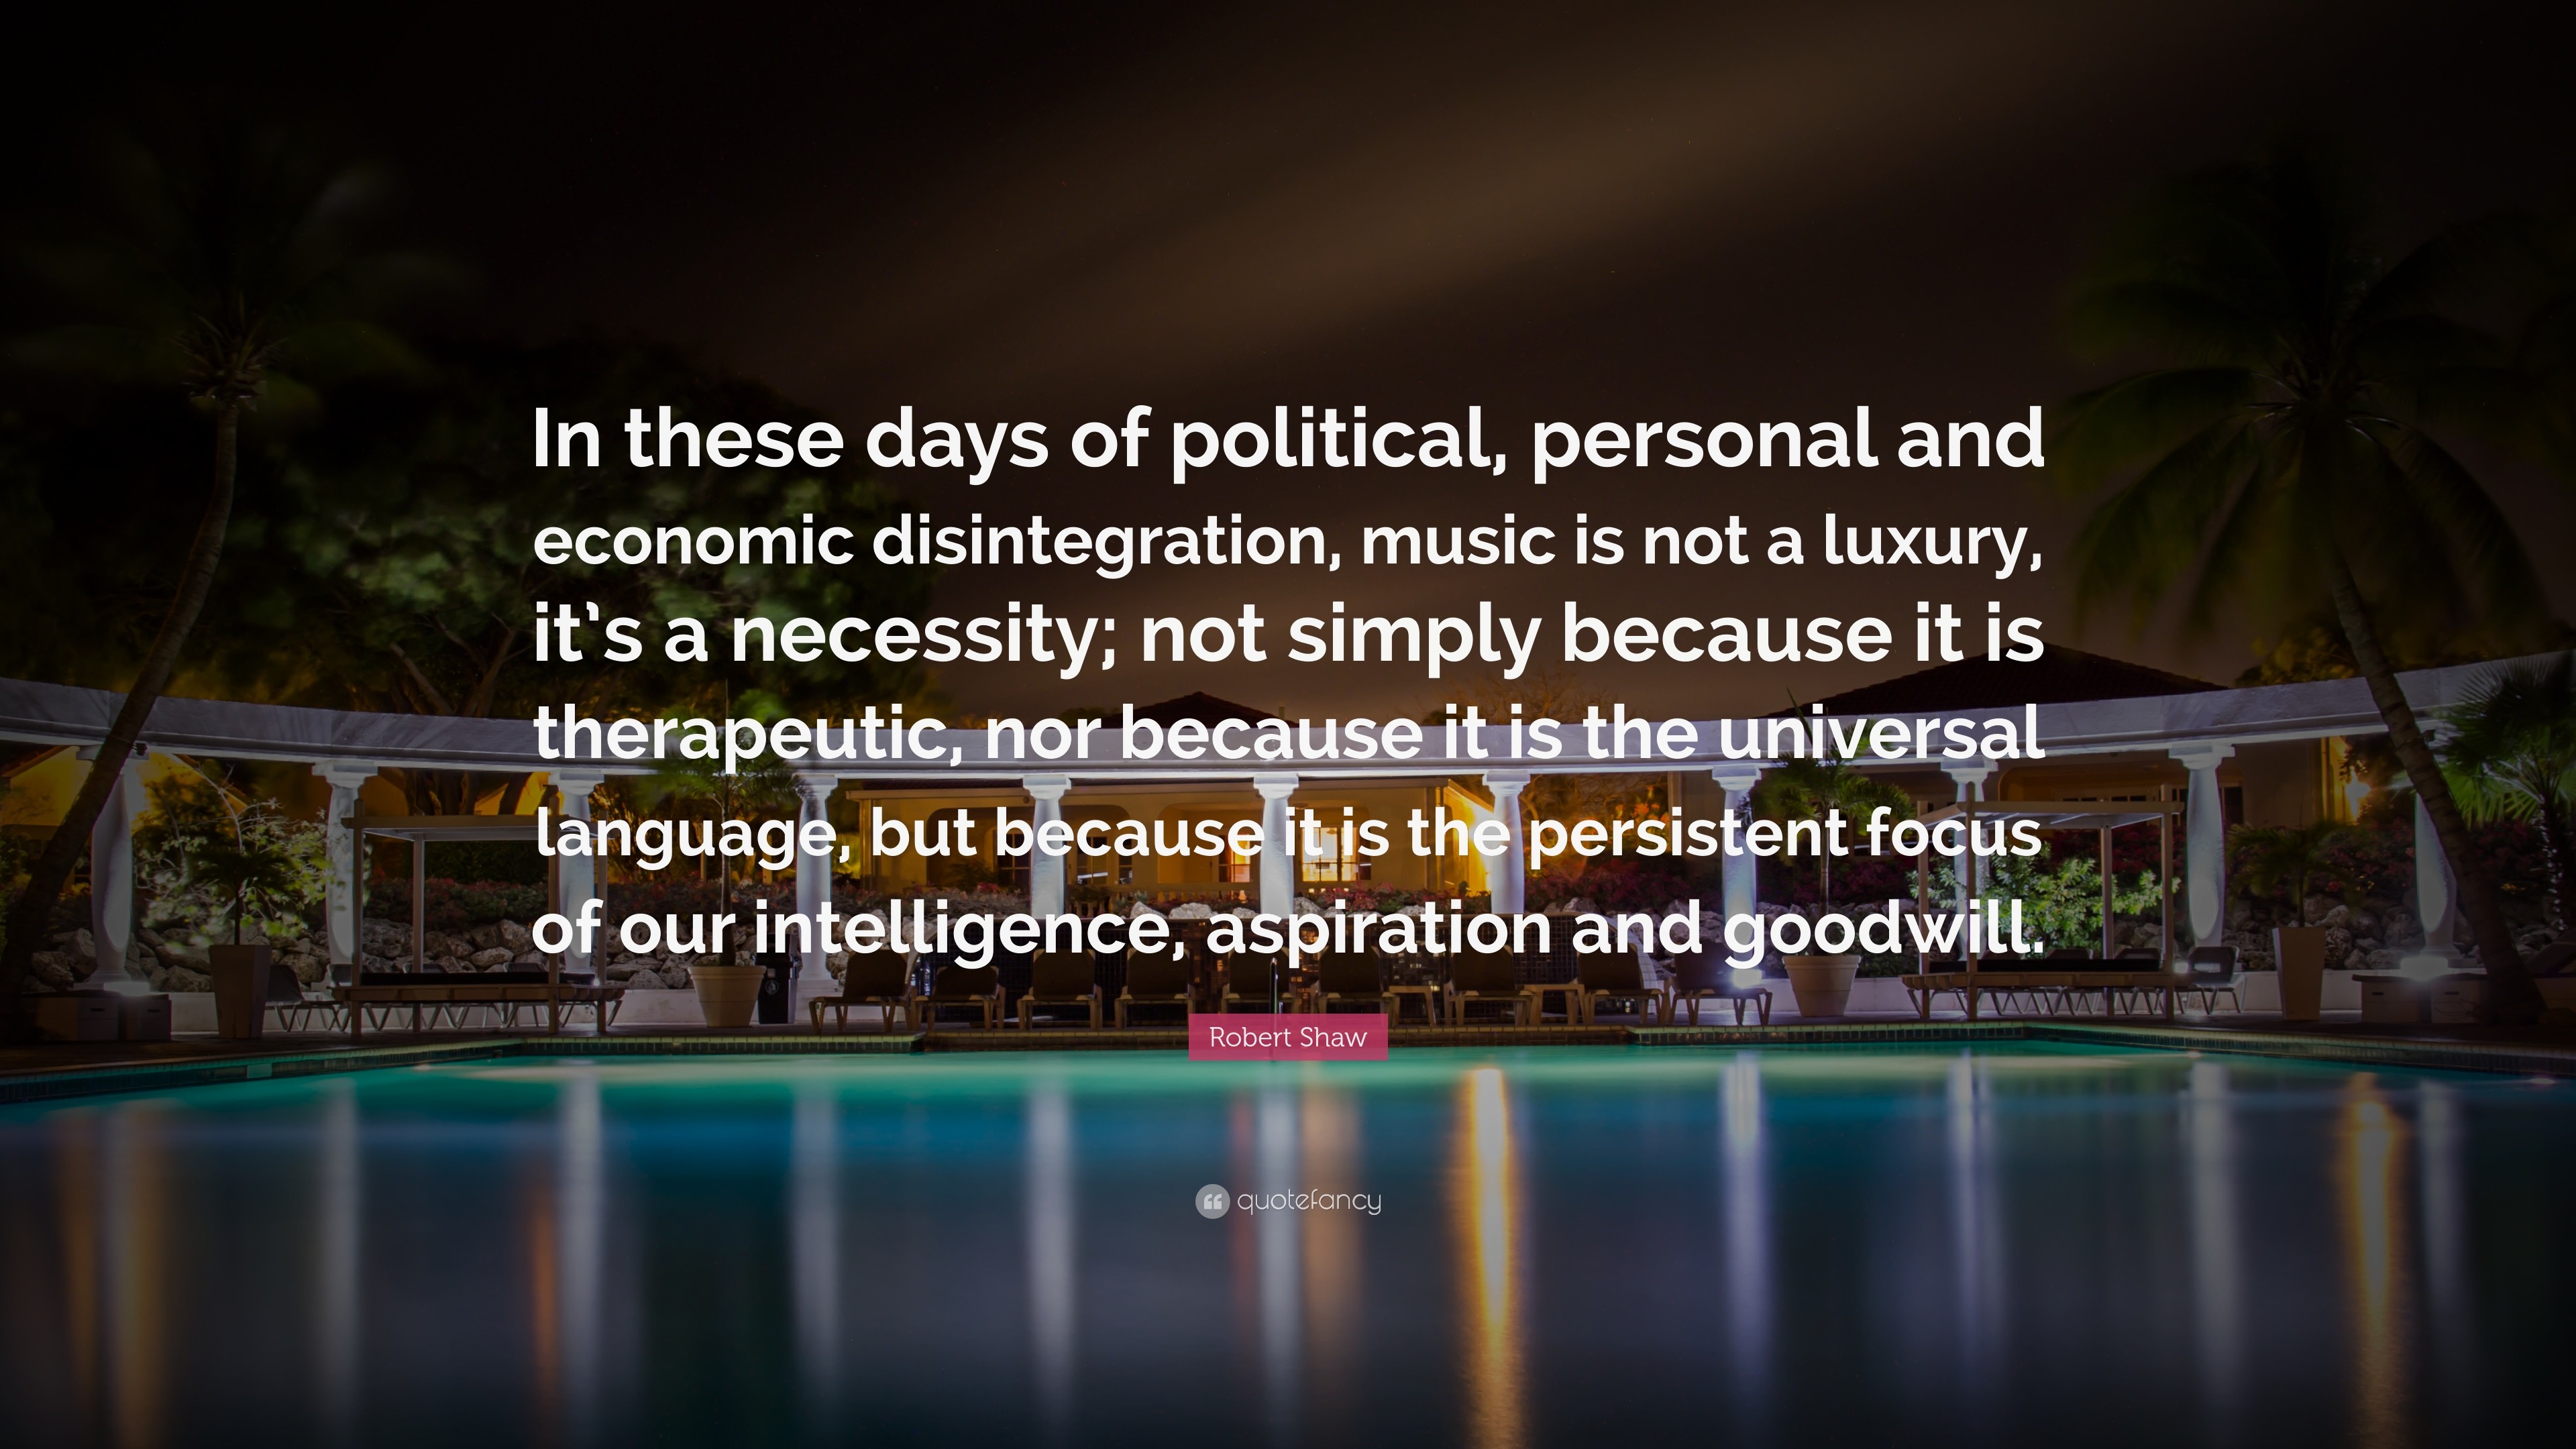 3840x2160 Robert Shaw Quote: “In these days of political, personal and economic  disintegration,